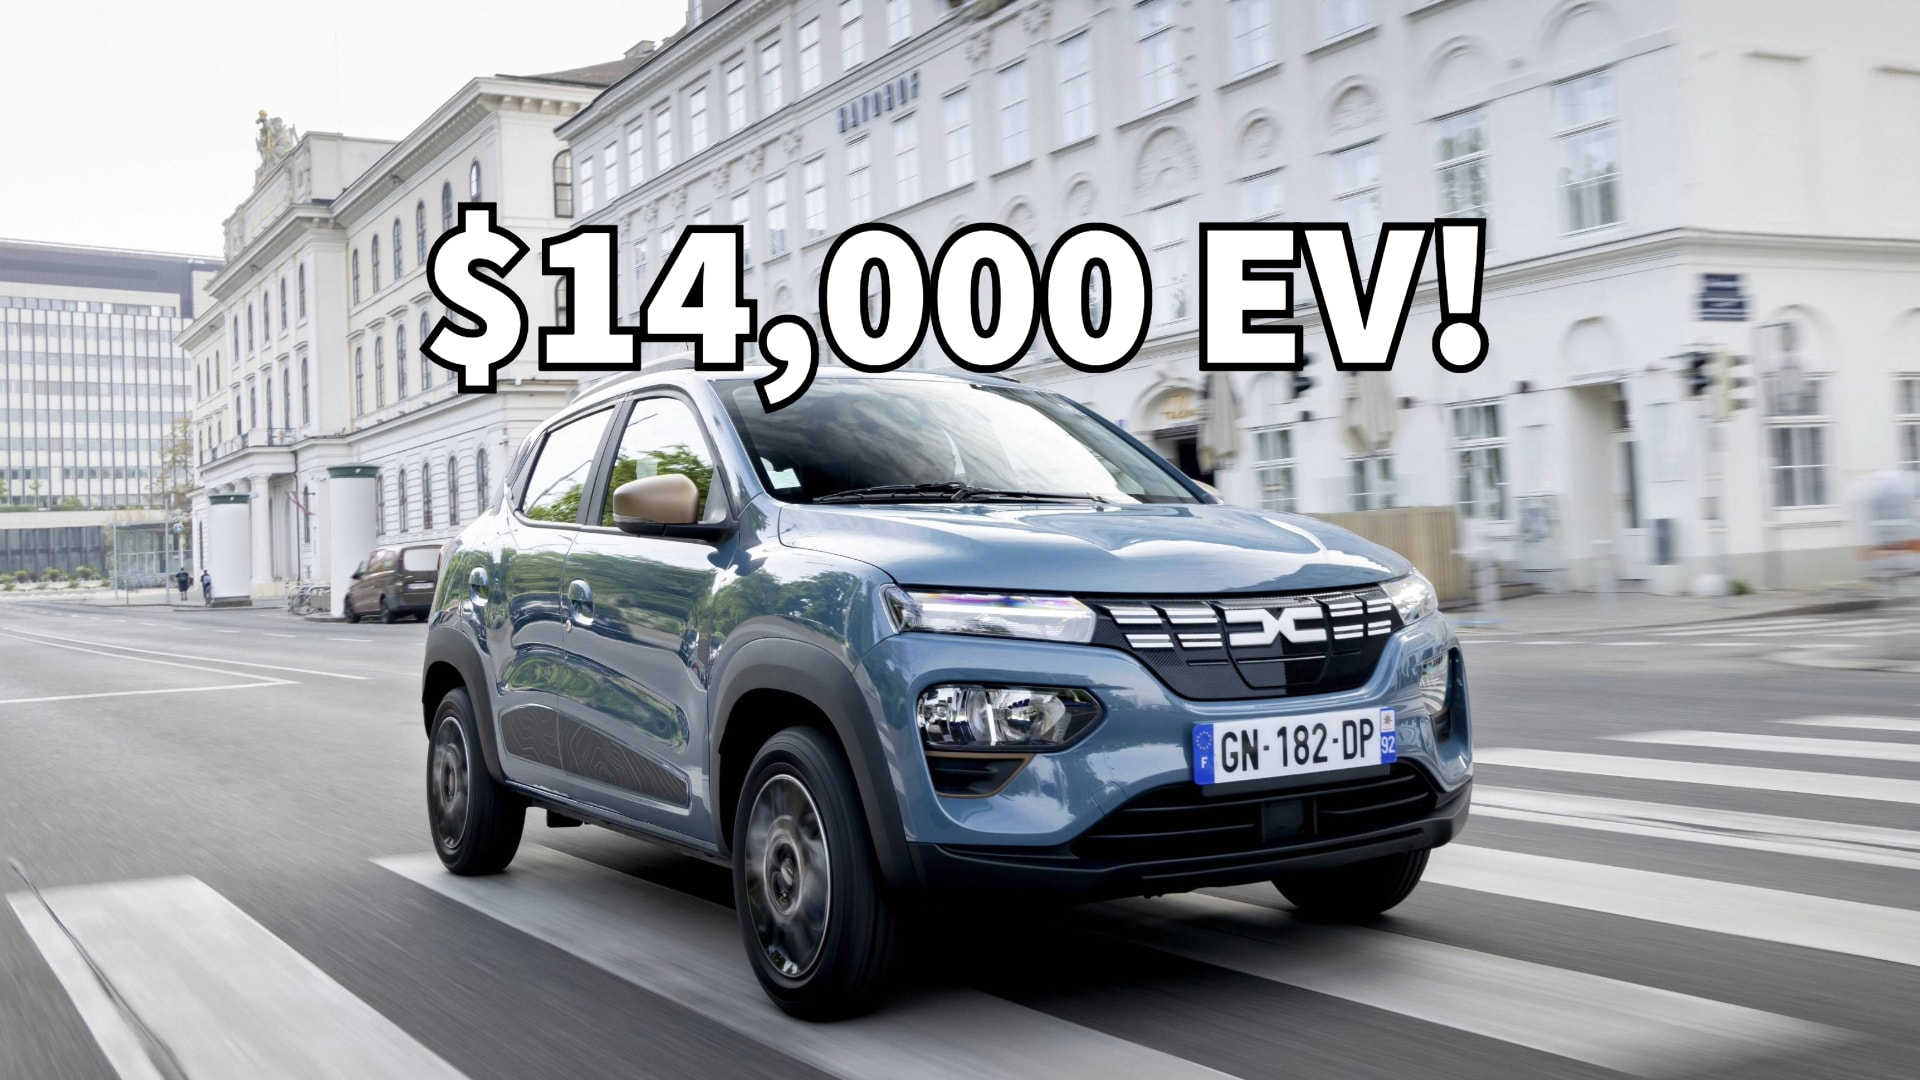 https://s1.cdn.autoevolution.com/images/news/the-tiny-dacia-spring-is-the-most-affordable-ev-in-germany-selling-for-less-than-14000-227441_1.jpeg